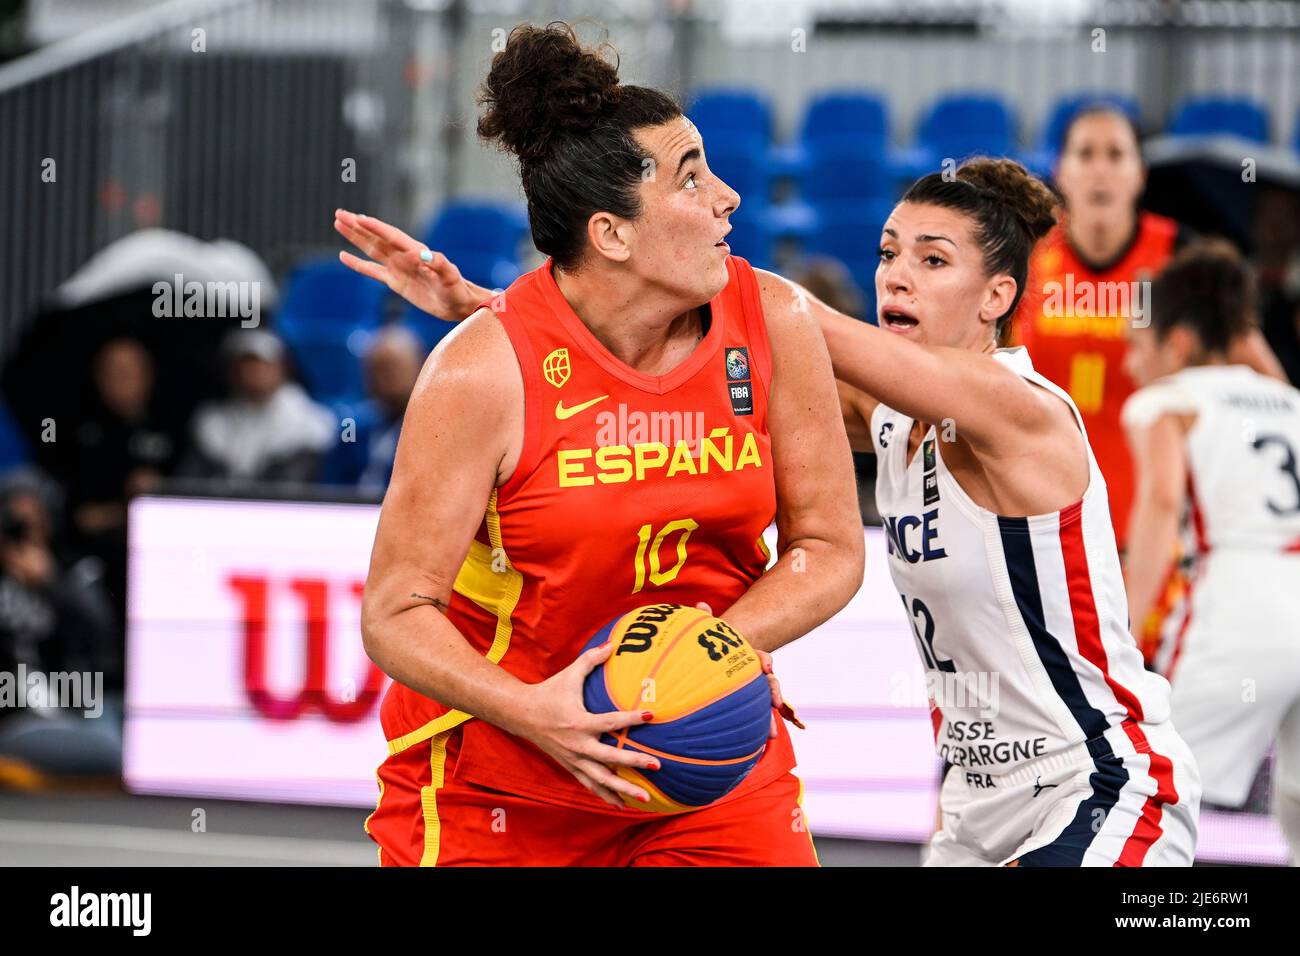 Spain's Aitana Cuevas and French Laetitia Guapo pictured in action during a 3x3 basketball game between France and Spain, in the Women's quarter final round at the FIBA 2022 world cup, Saturday 25 June 2022, in Antwerp. The FIBA 3x3 Basket World Cup 2022 takes place from 21 to 26 June in Antwerp. BELGA PHOTO TOM GOYVAERTS Stock Photo